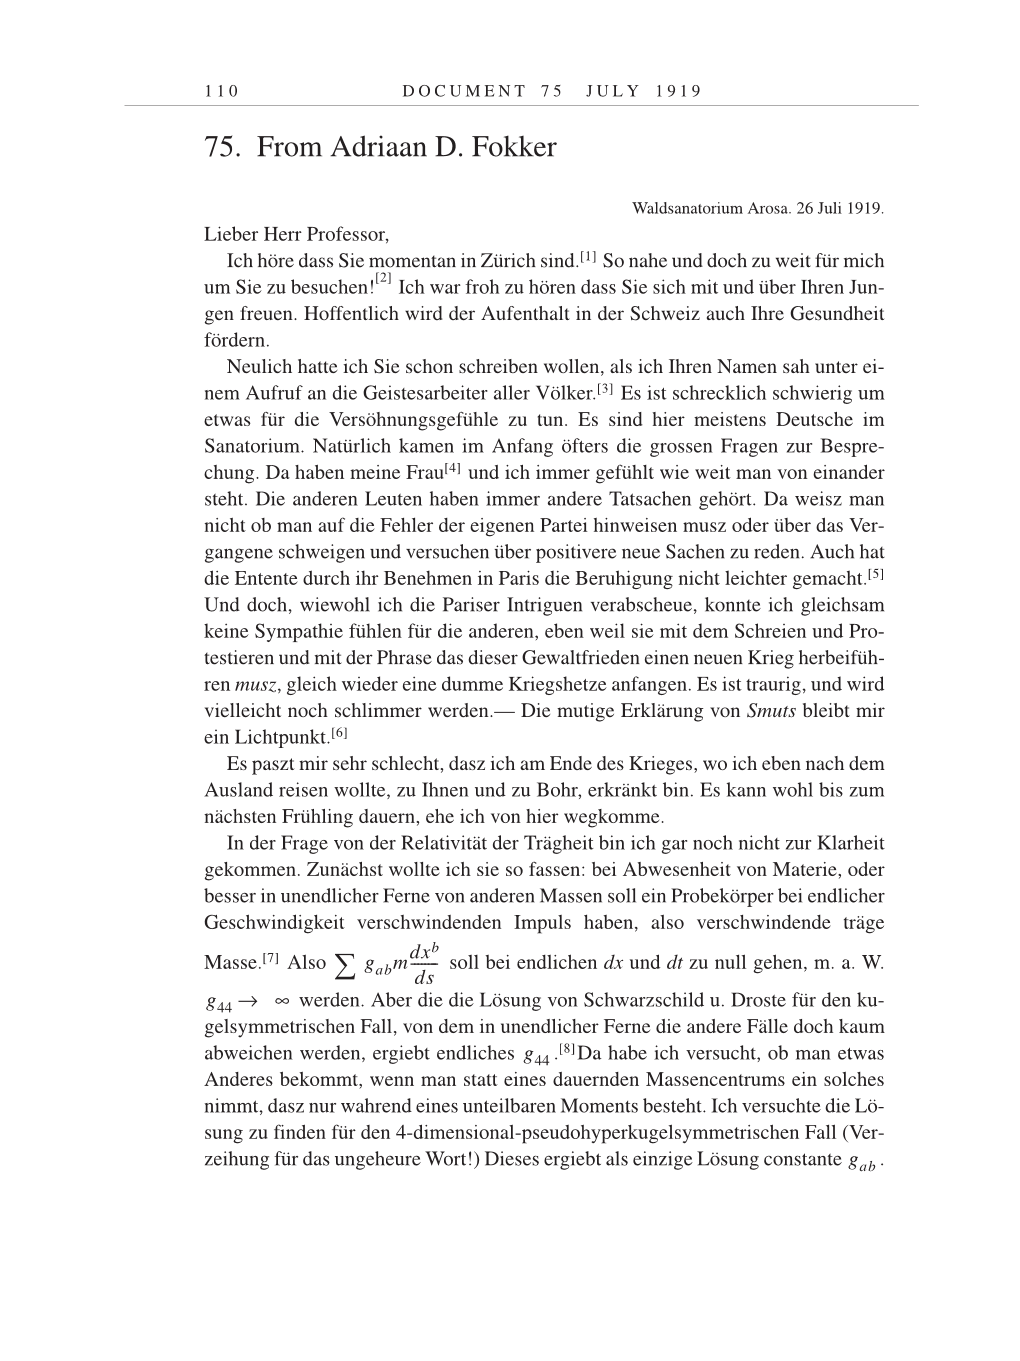 Volume 9: The Berlin Years: Correspondence January 1919-April 1920 page 110